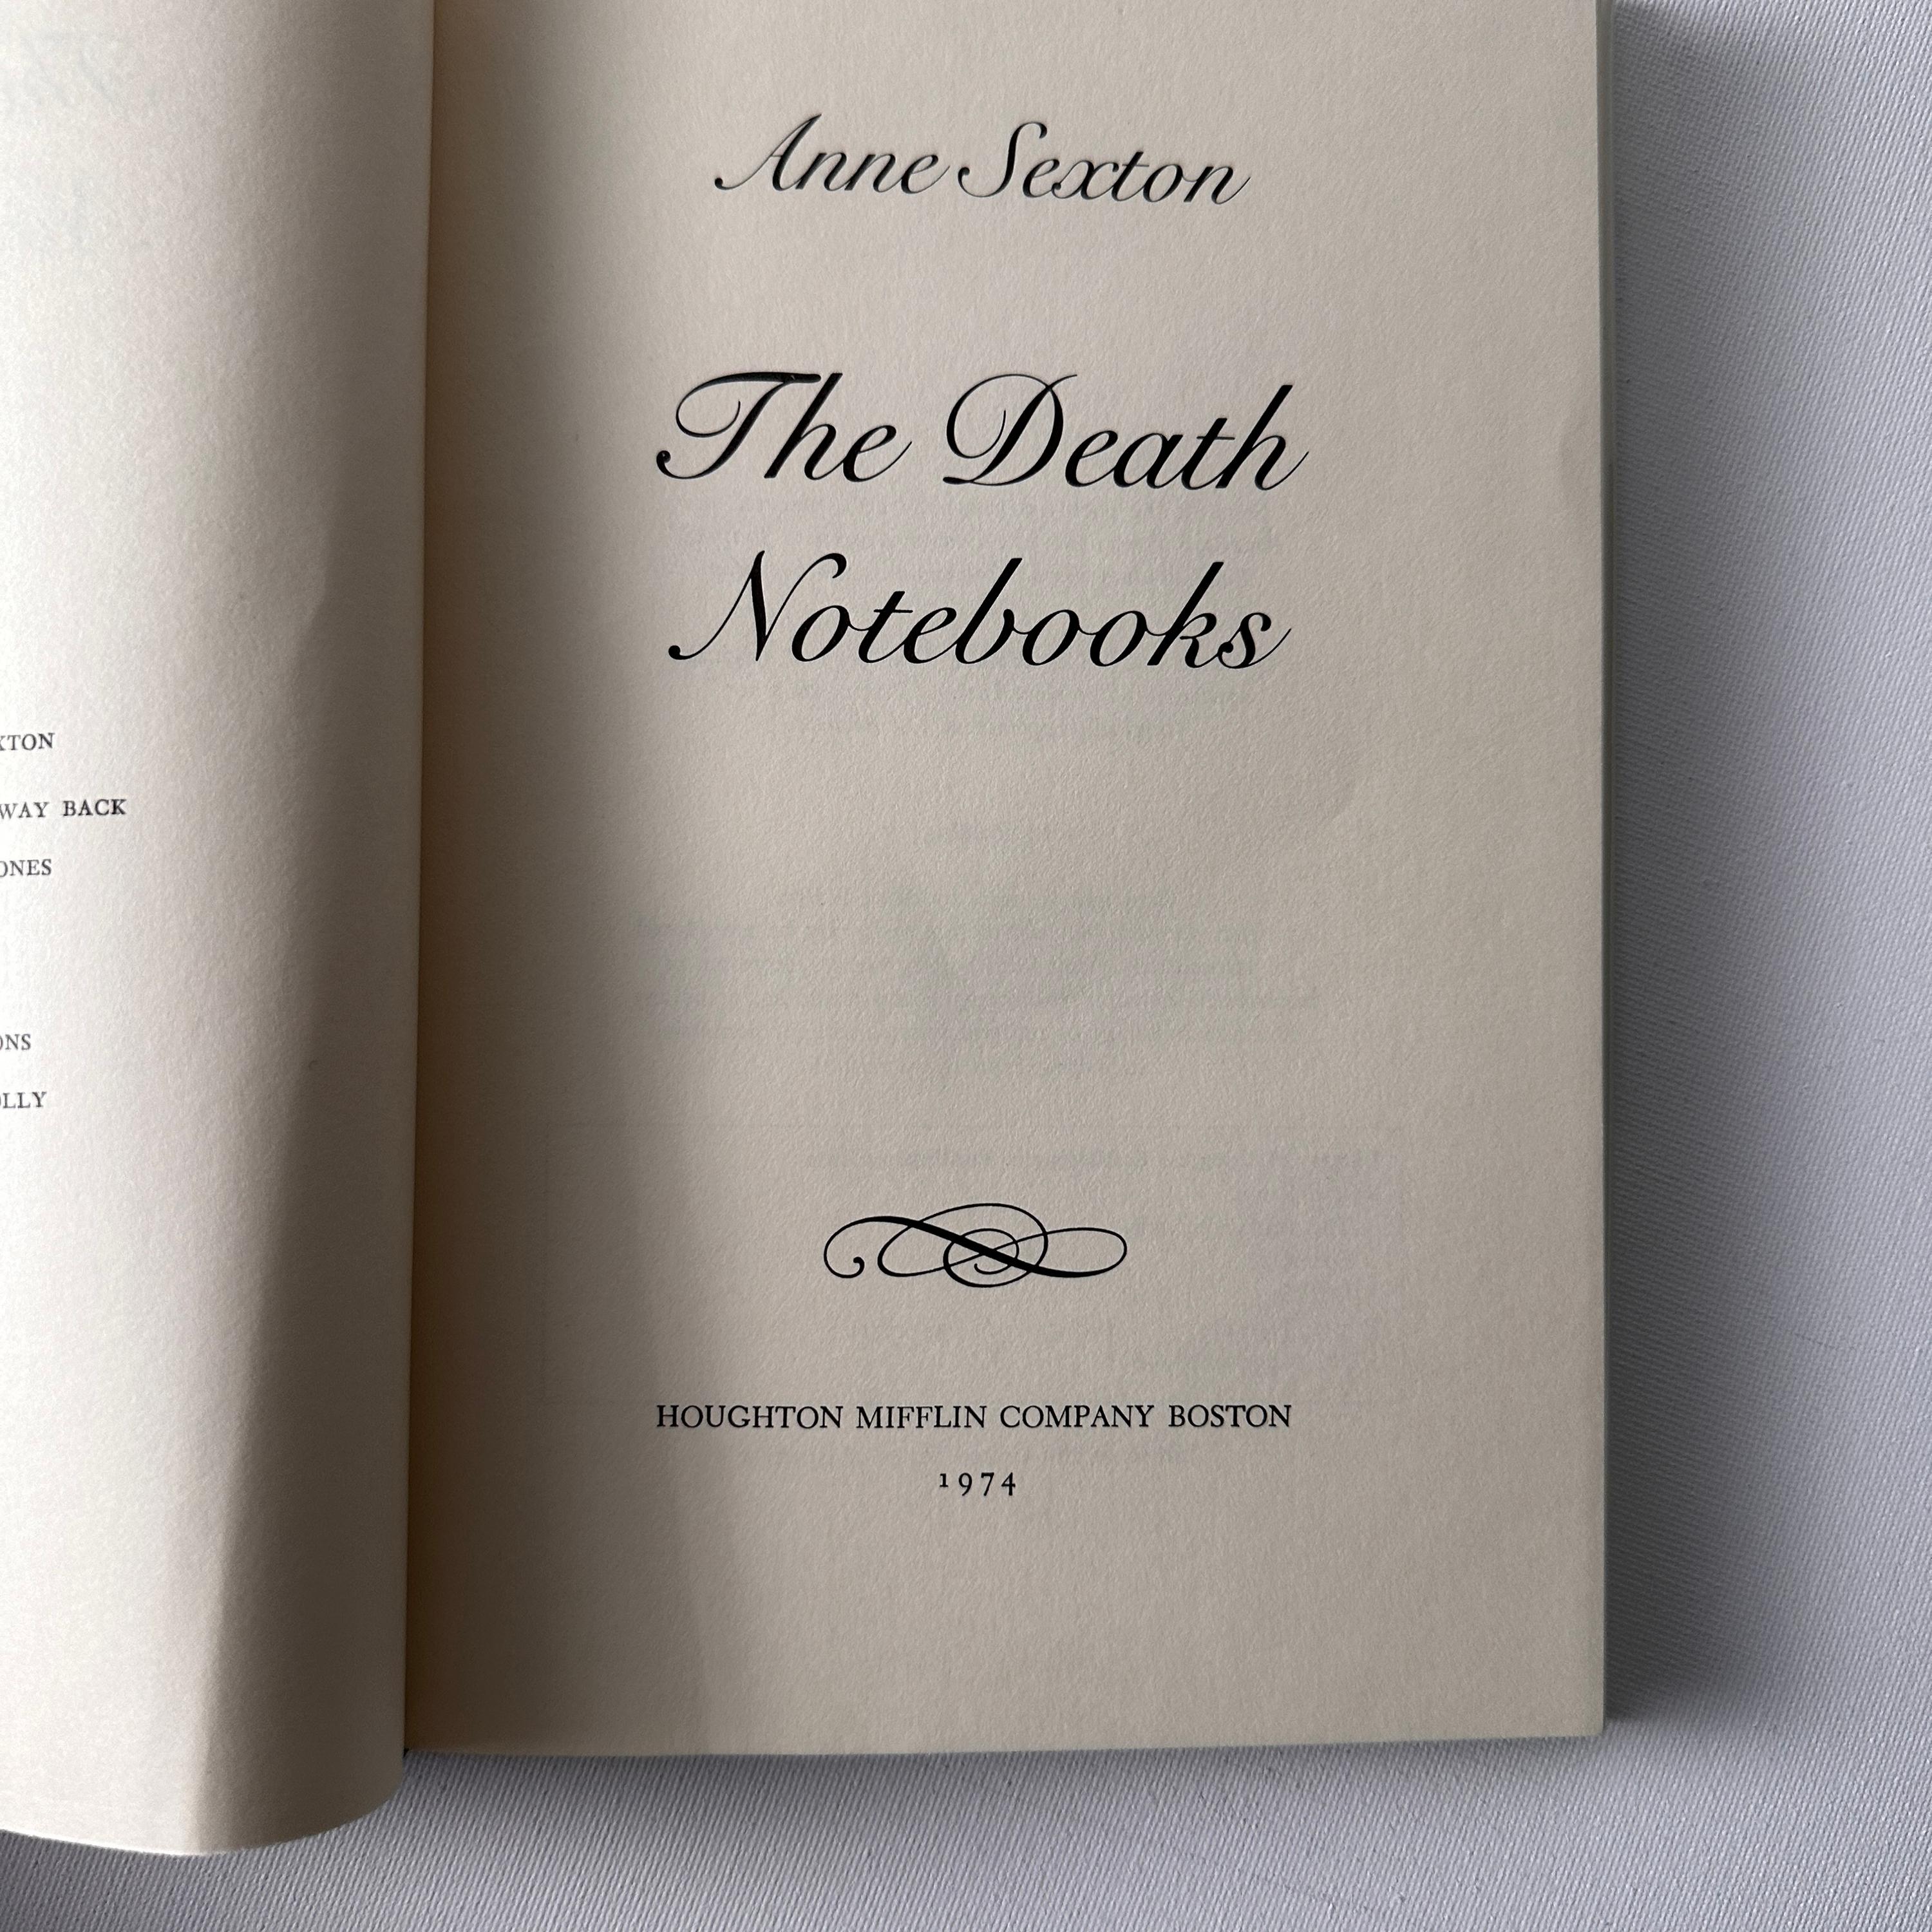 Paper Anne Sexton Signed Galley & First Edition, The Death Notebooks For Sale